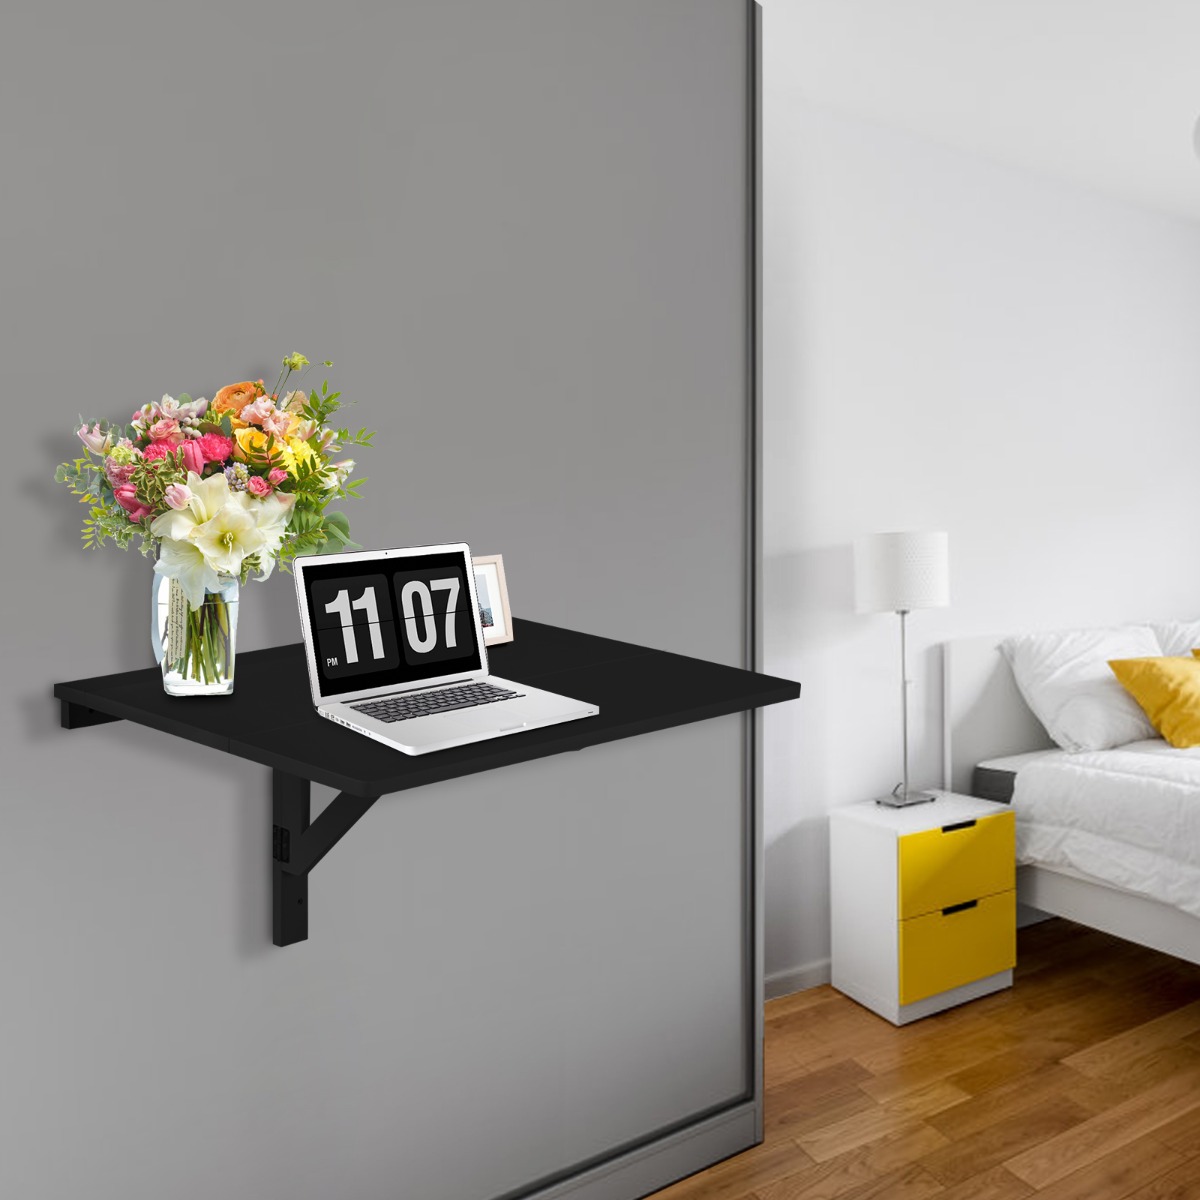 Costway 80cm x 60.5cm Wall Mounted Folding Table for Small Spaces